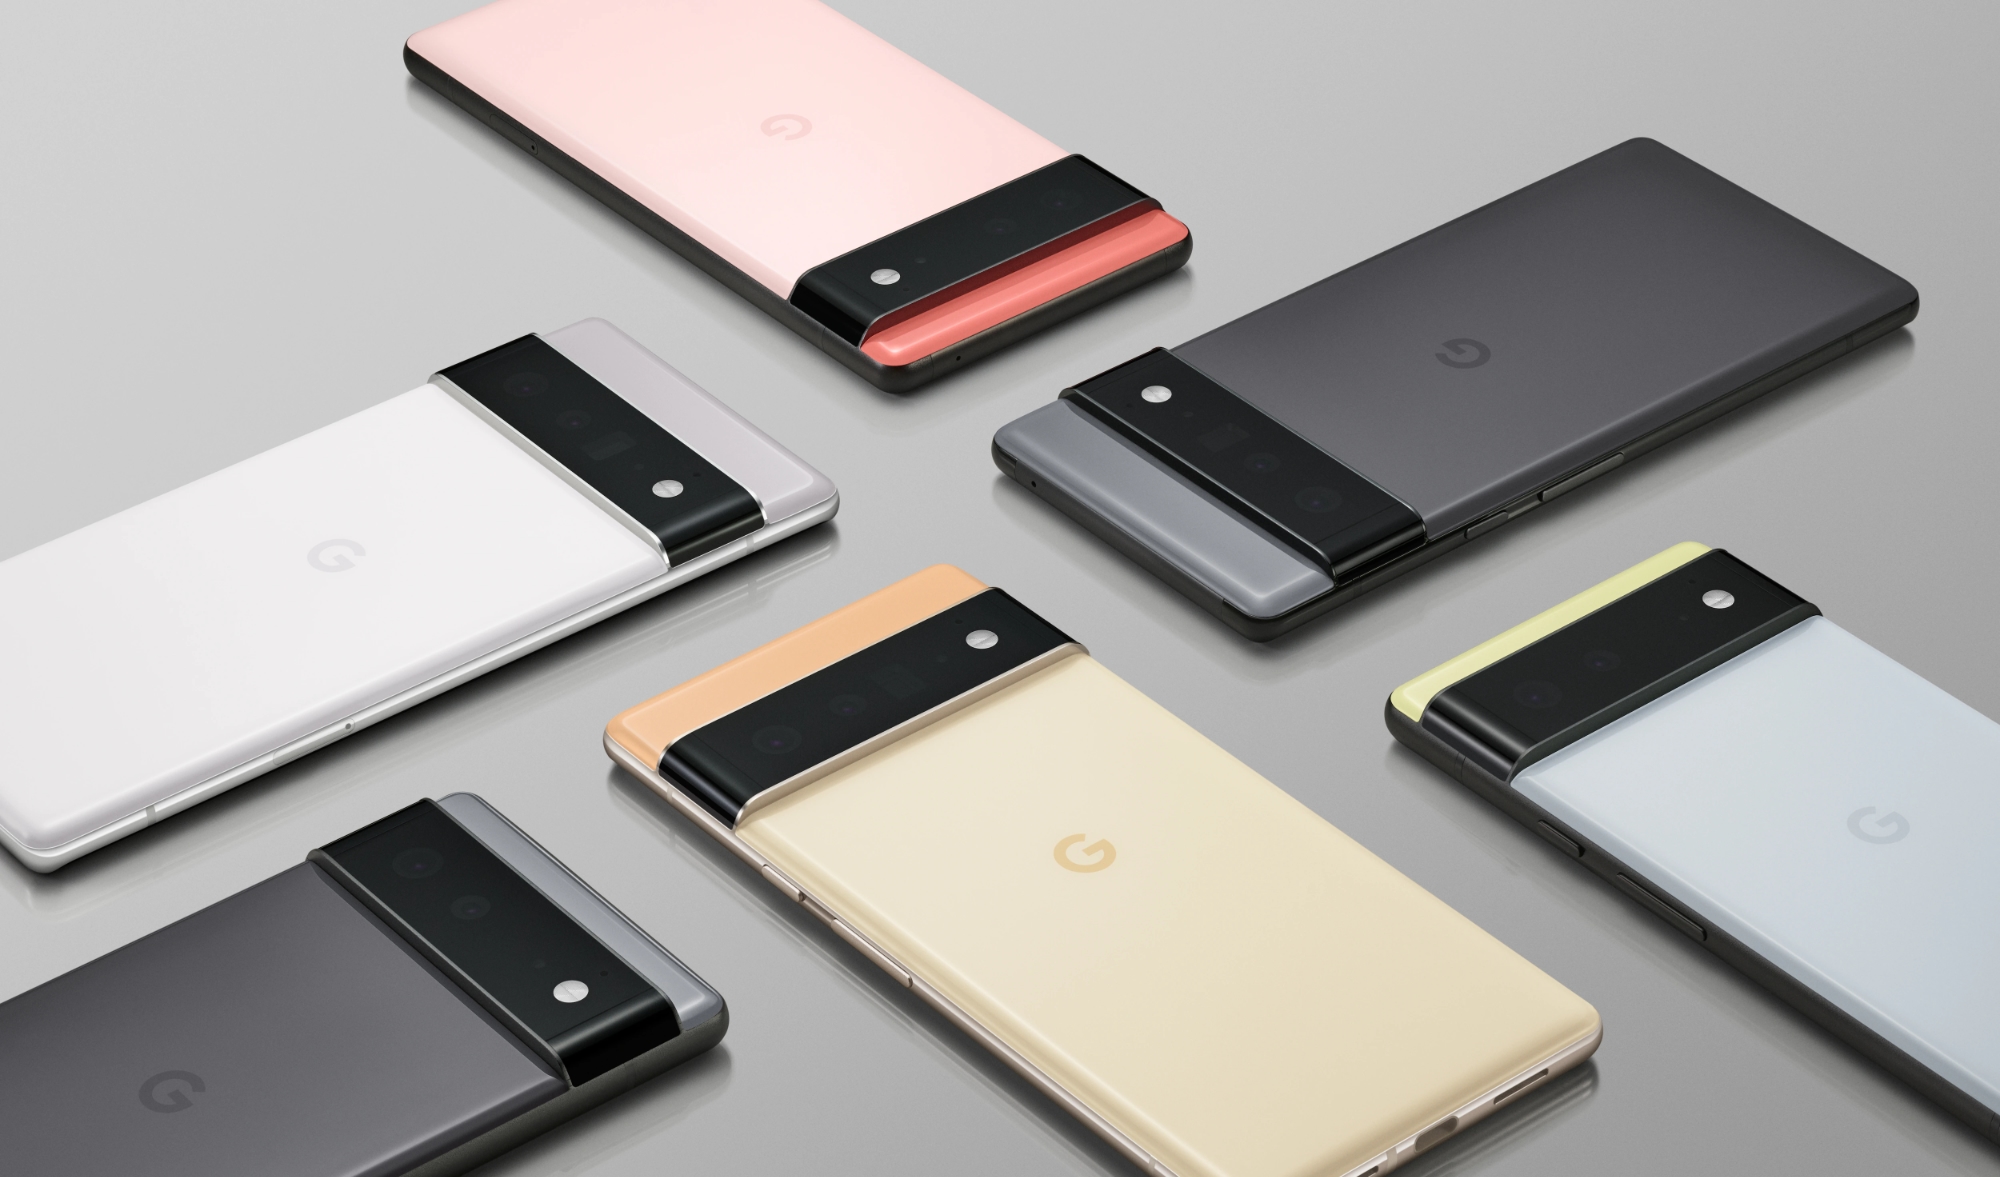 John Prosser revealed when Google is set to unveil the Pixel 6 and Pixel 6 Pro smartphones